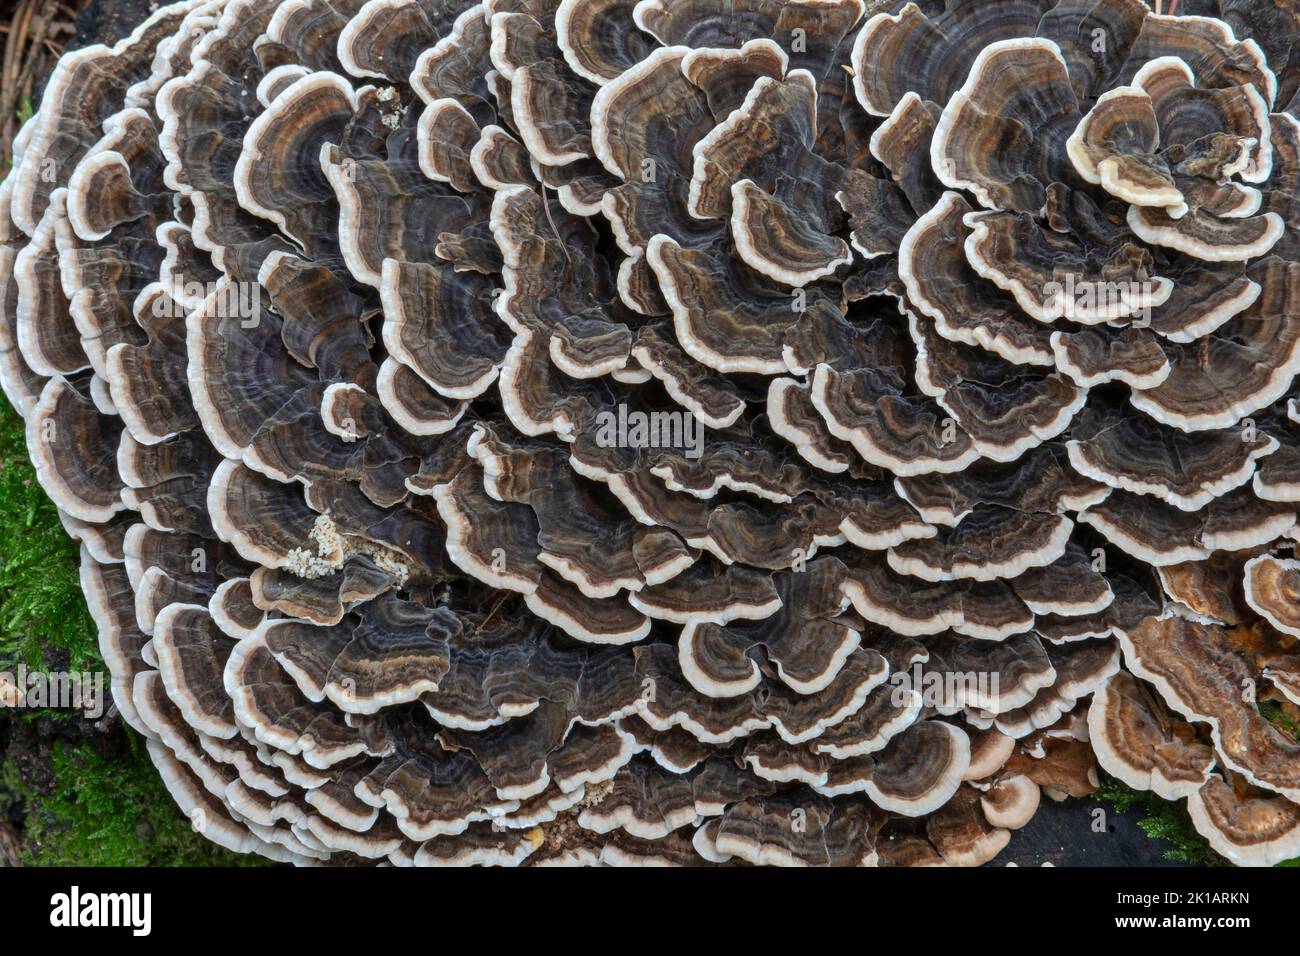 Trametes versicolor growing in the forest. The mushroom is also known as Turkey tail , Coriolus versicolor or Polyporus versicolor. Stock Photo